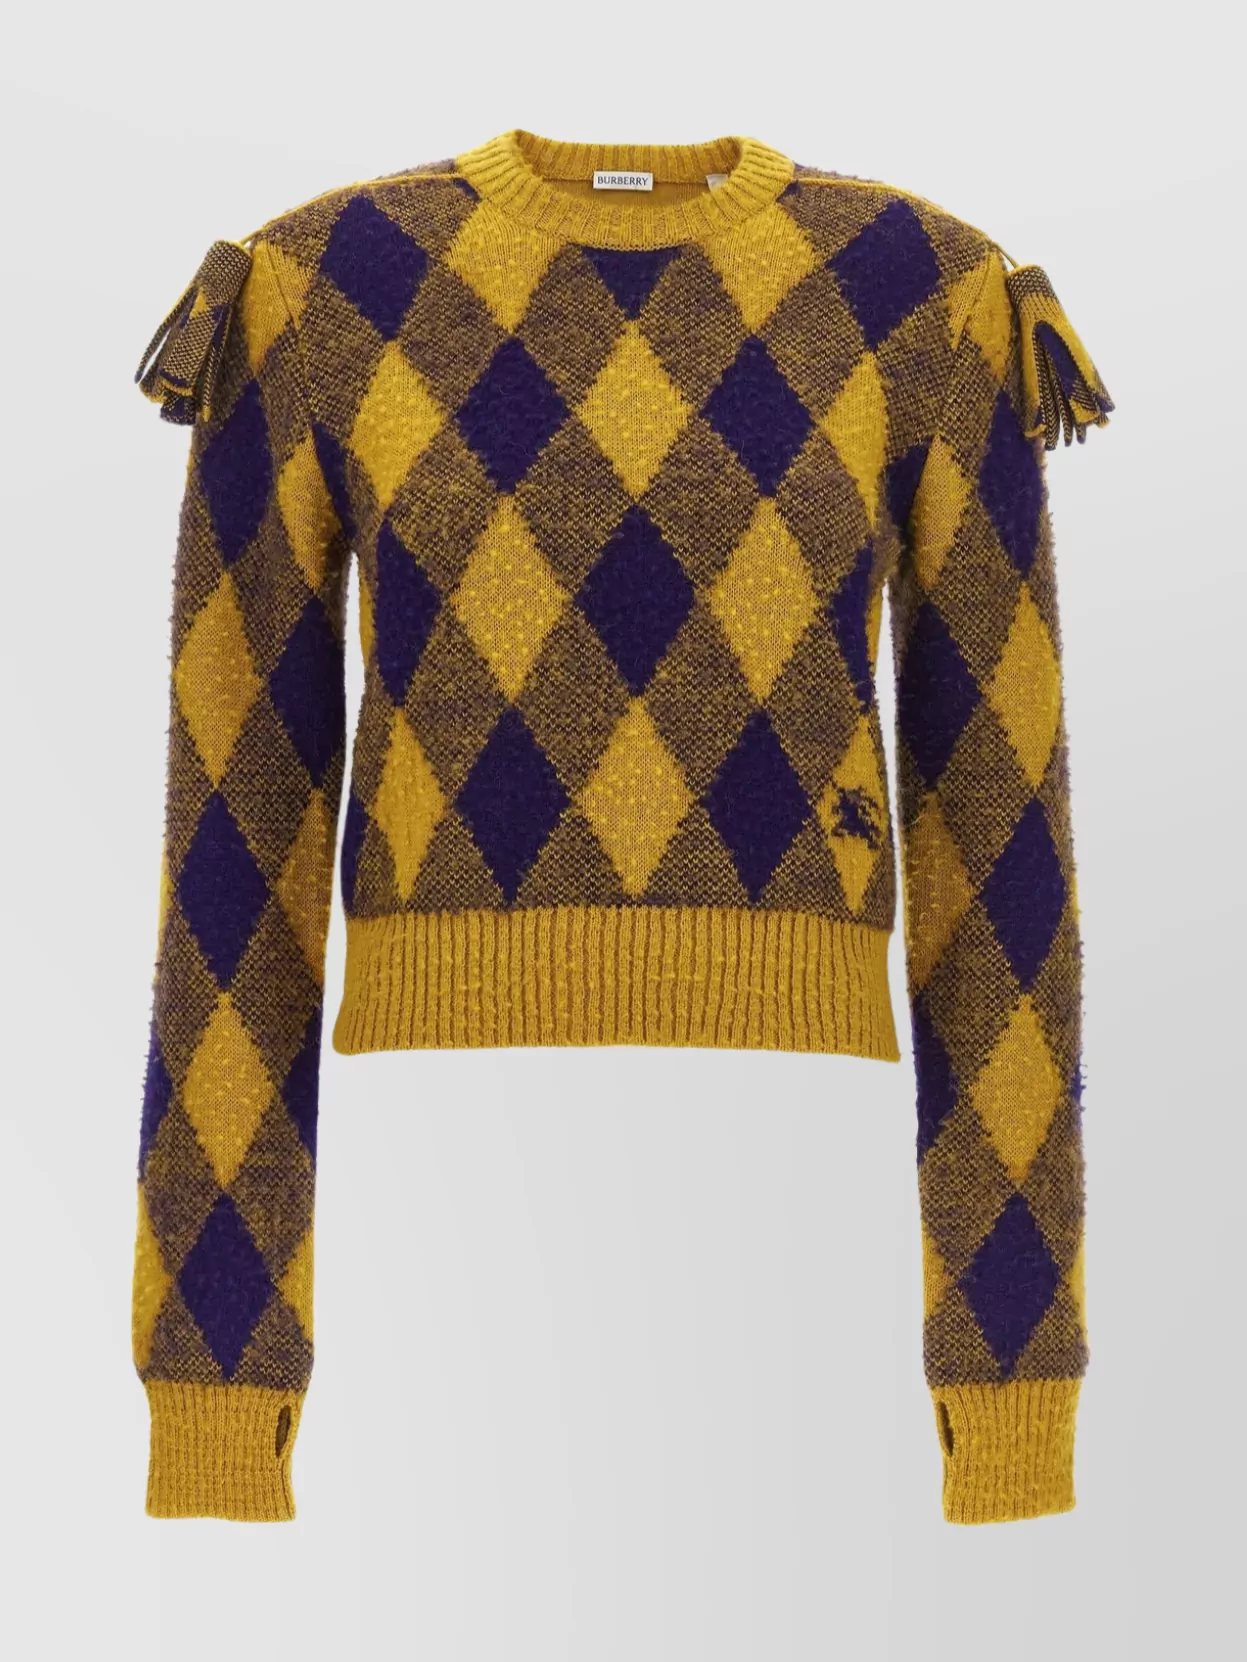 Burberry Diamond Crew Neck Knitwear With Ribbed Finish In Multi